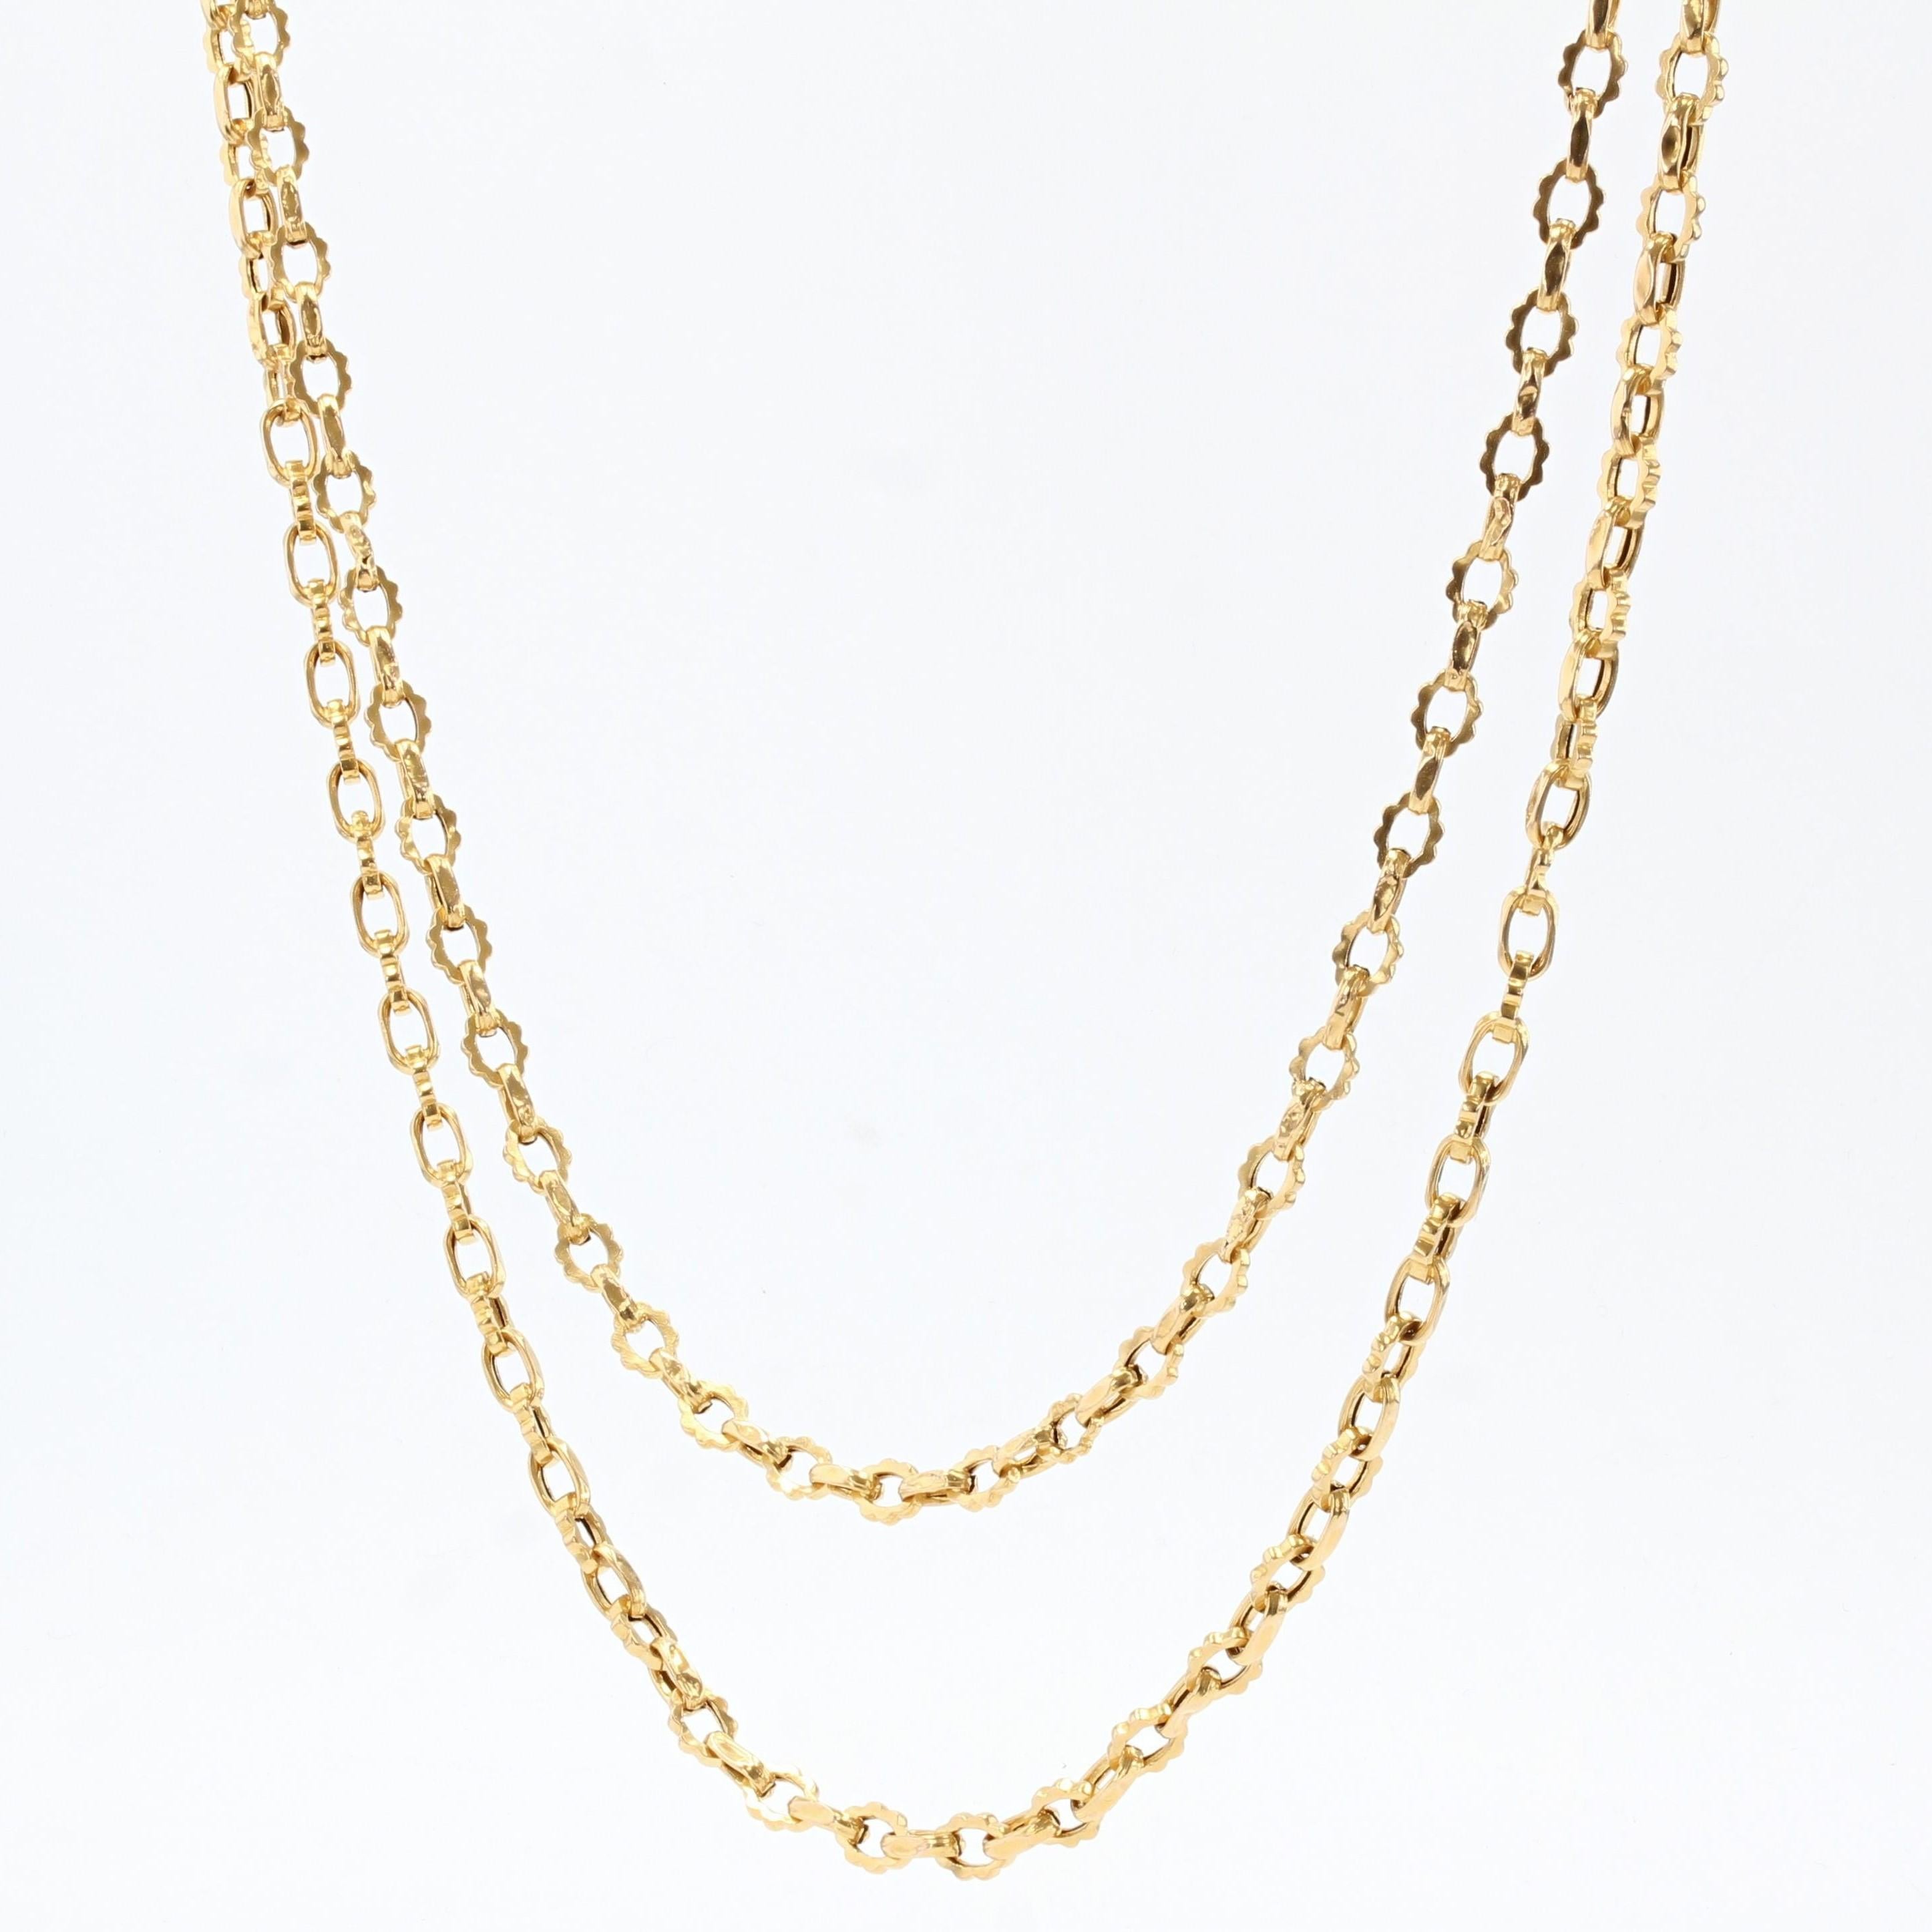 Women's French 1830s 18 Karat Yellow Gold Chiseled Mesh Long Necklace For Sale